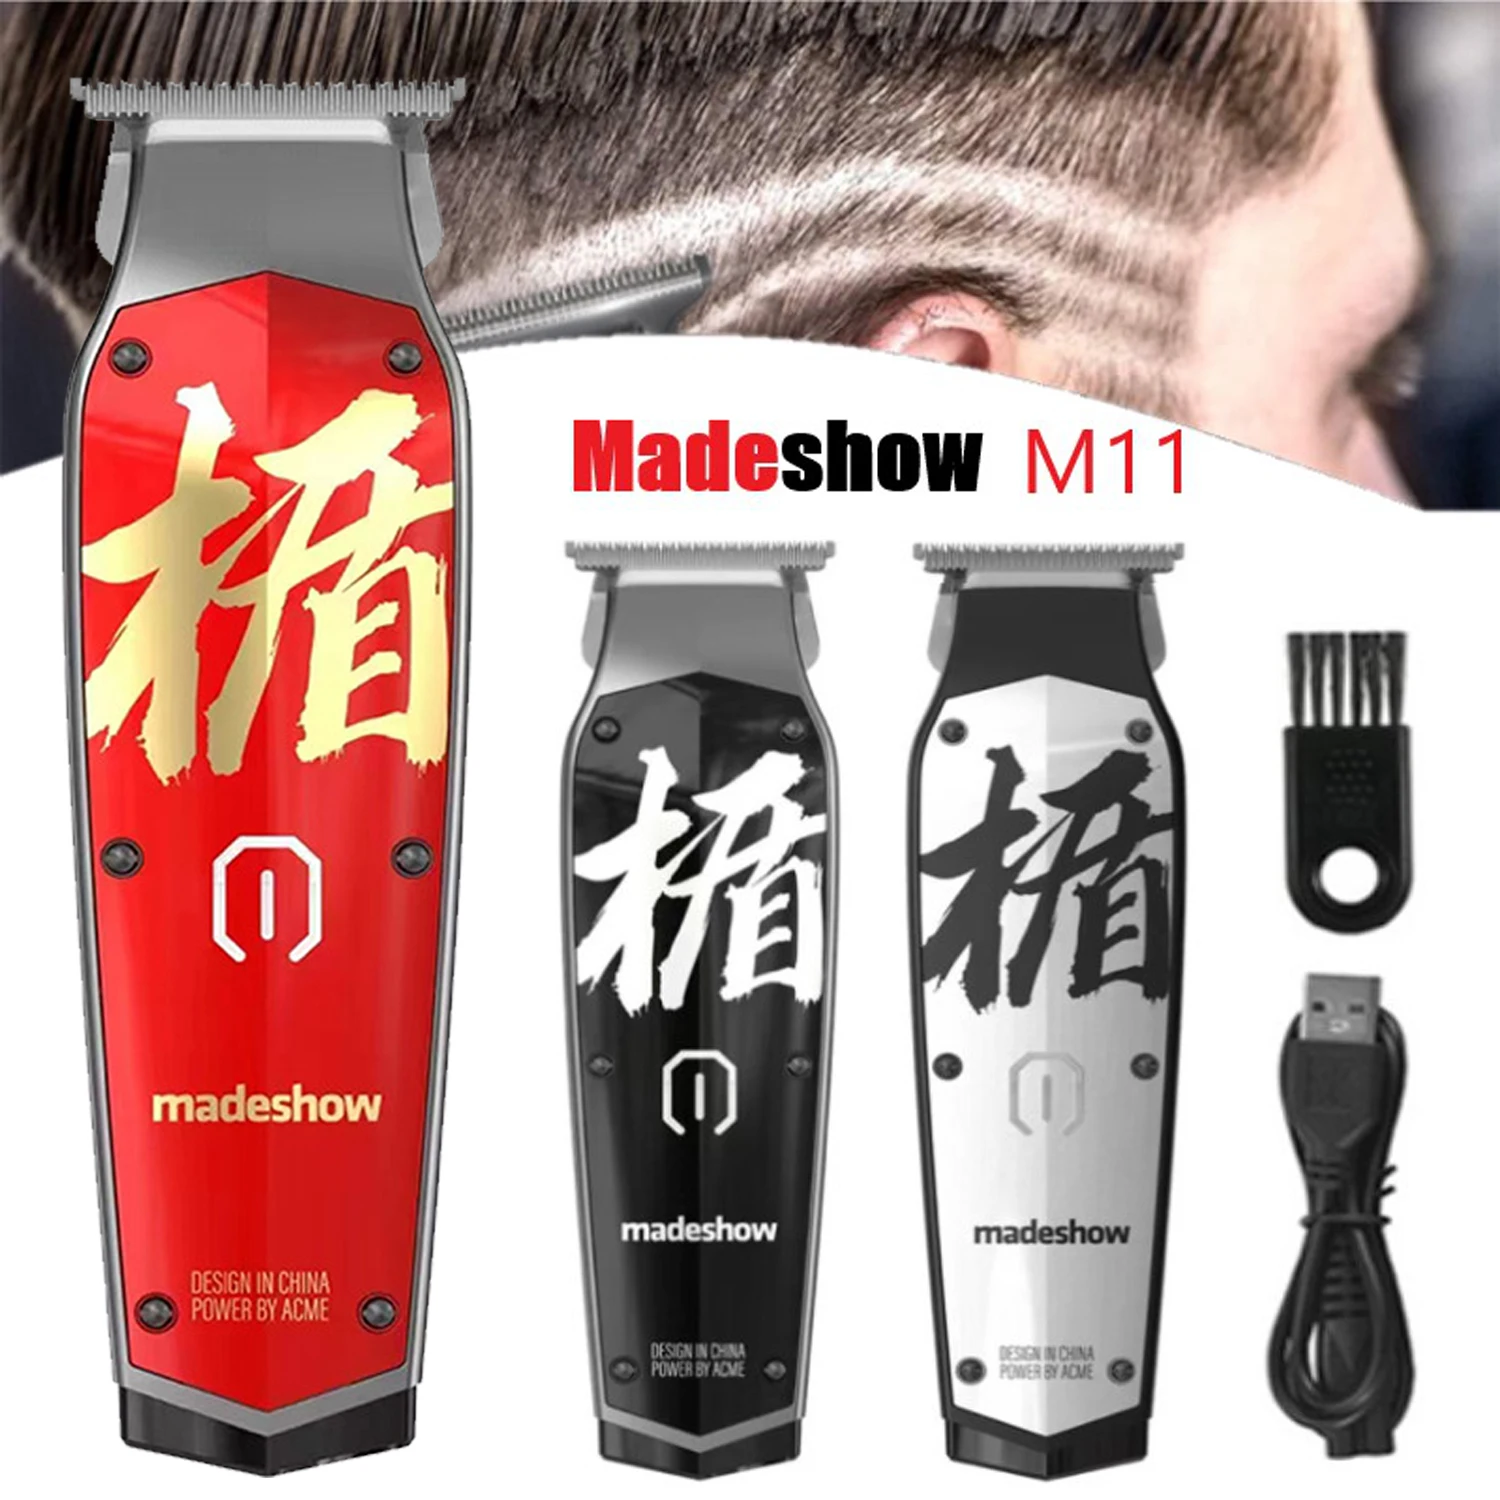 

2023 New Madeshow M11 Professional Hair Salon Clippers Carving Mark Oil Head Electric Hair Trimmer Shaved Head Artifact Razor